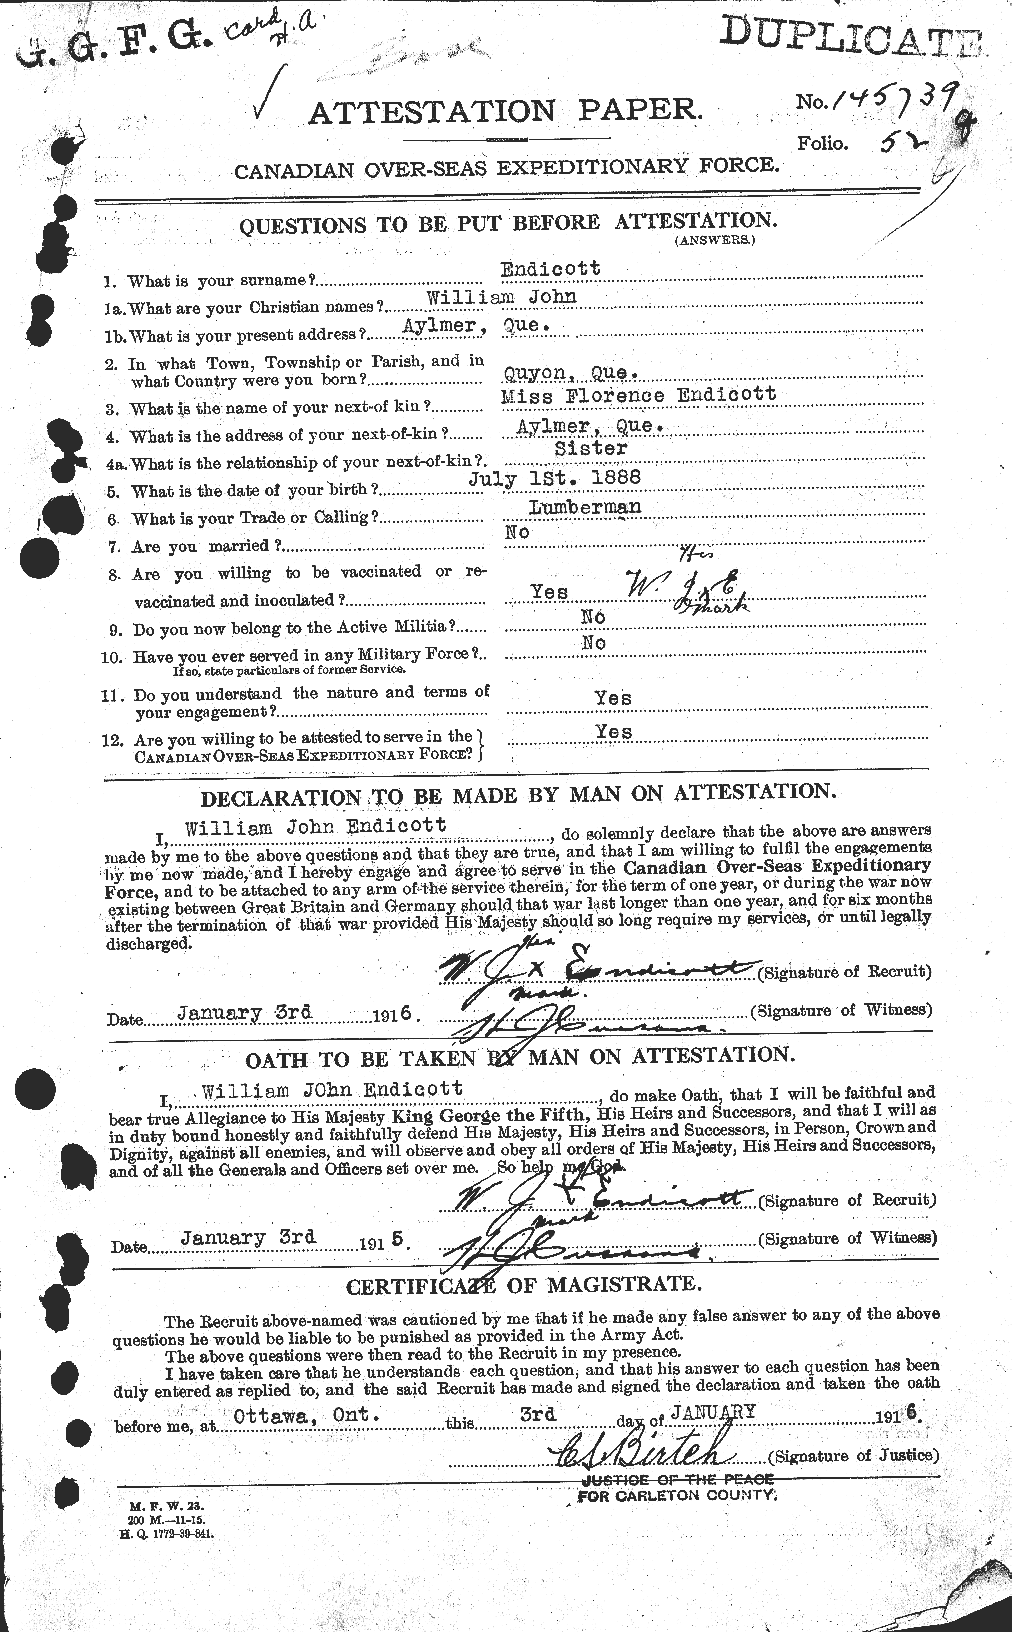 Personnel Records of the First World War - CEF 313925a